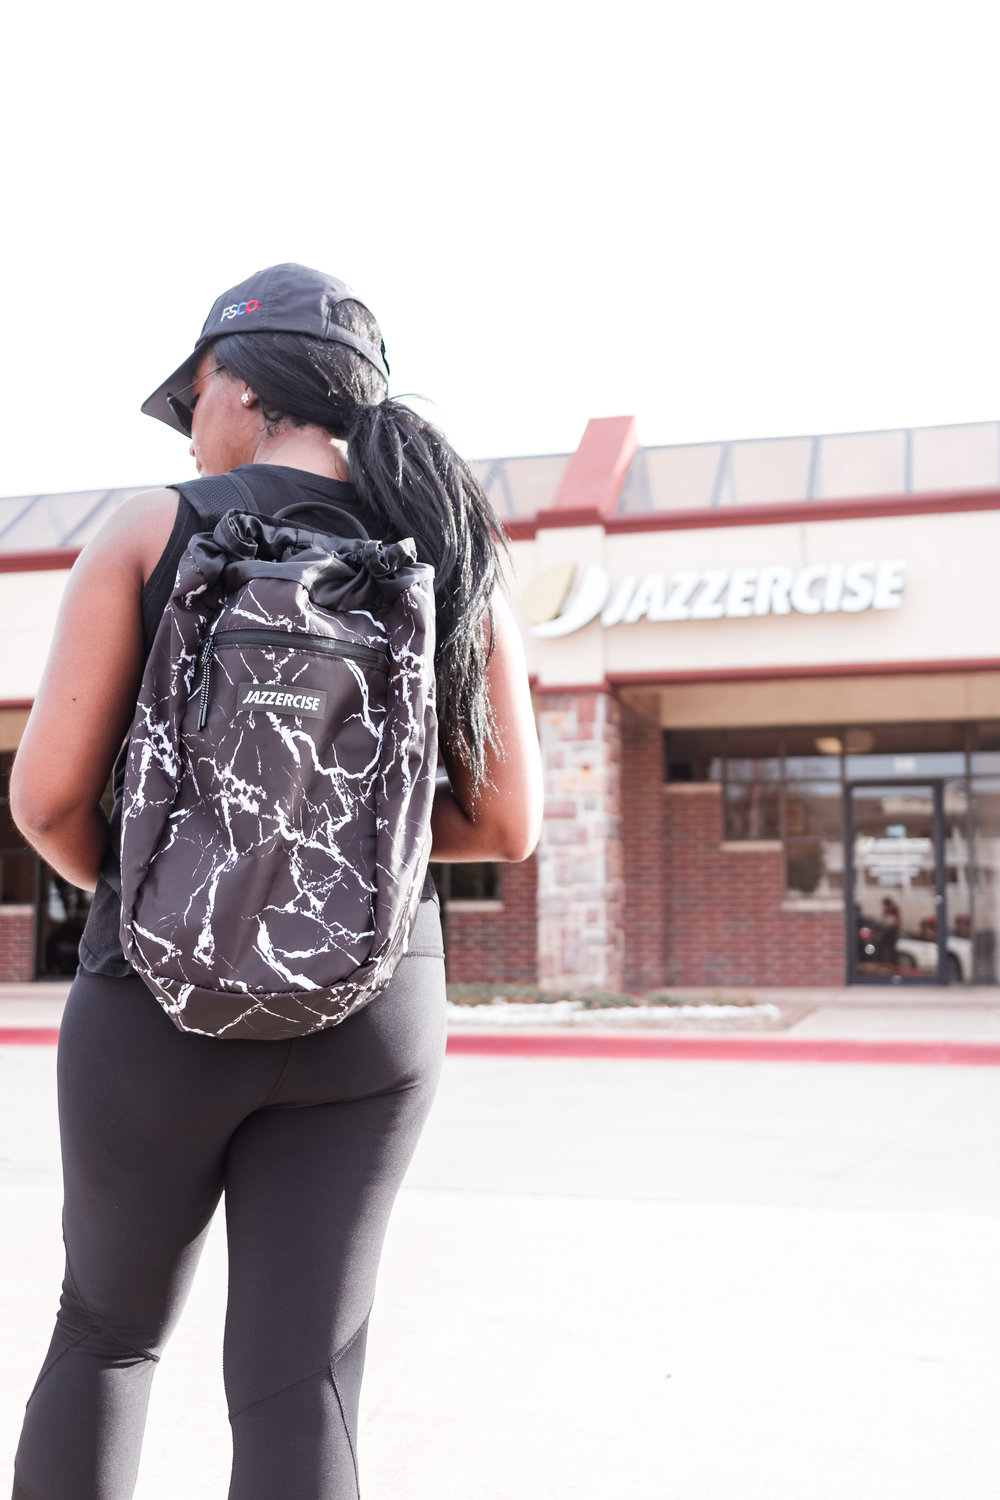 jazzercise-workout-plano-fitness-studio-review.jpg